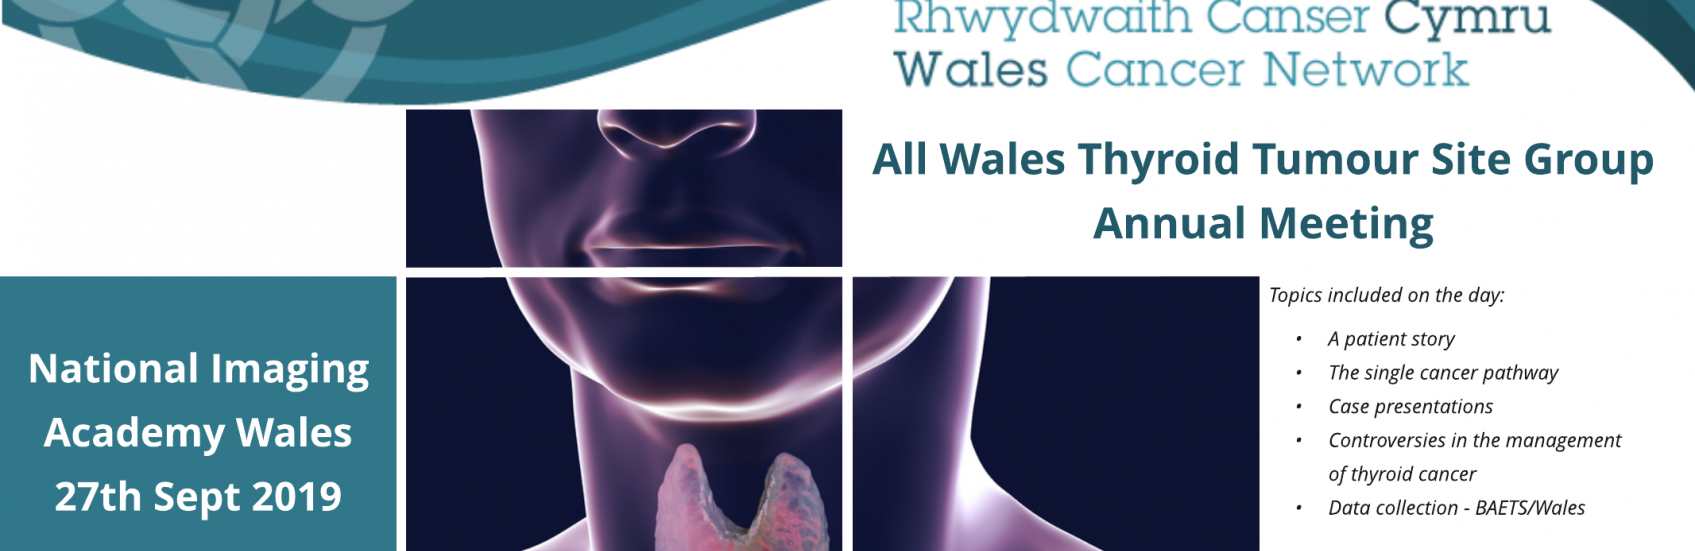 Wales Cancer Network, Thyroid Tumour Site Group